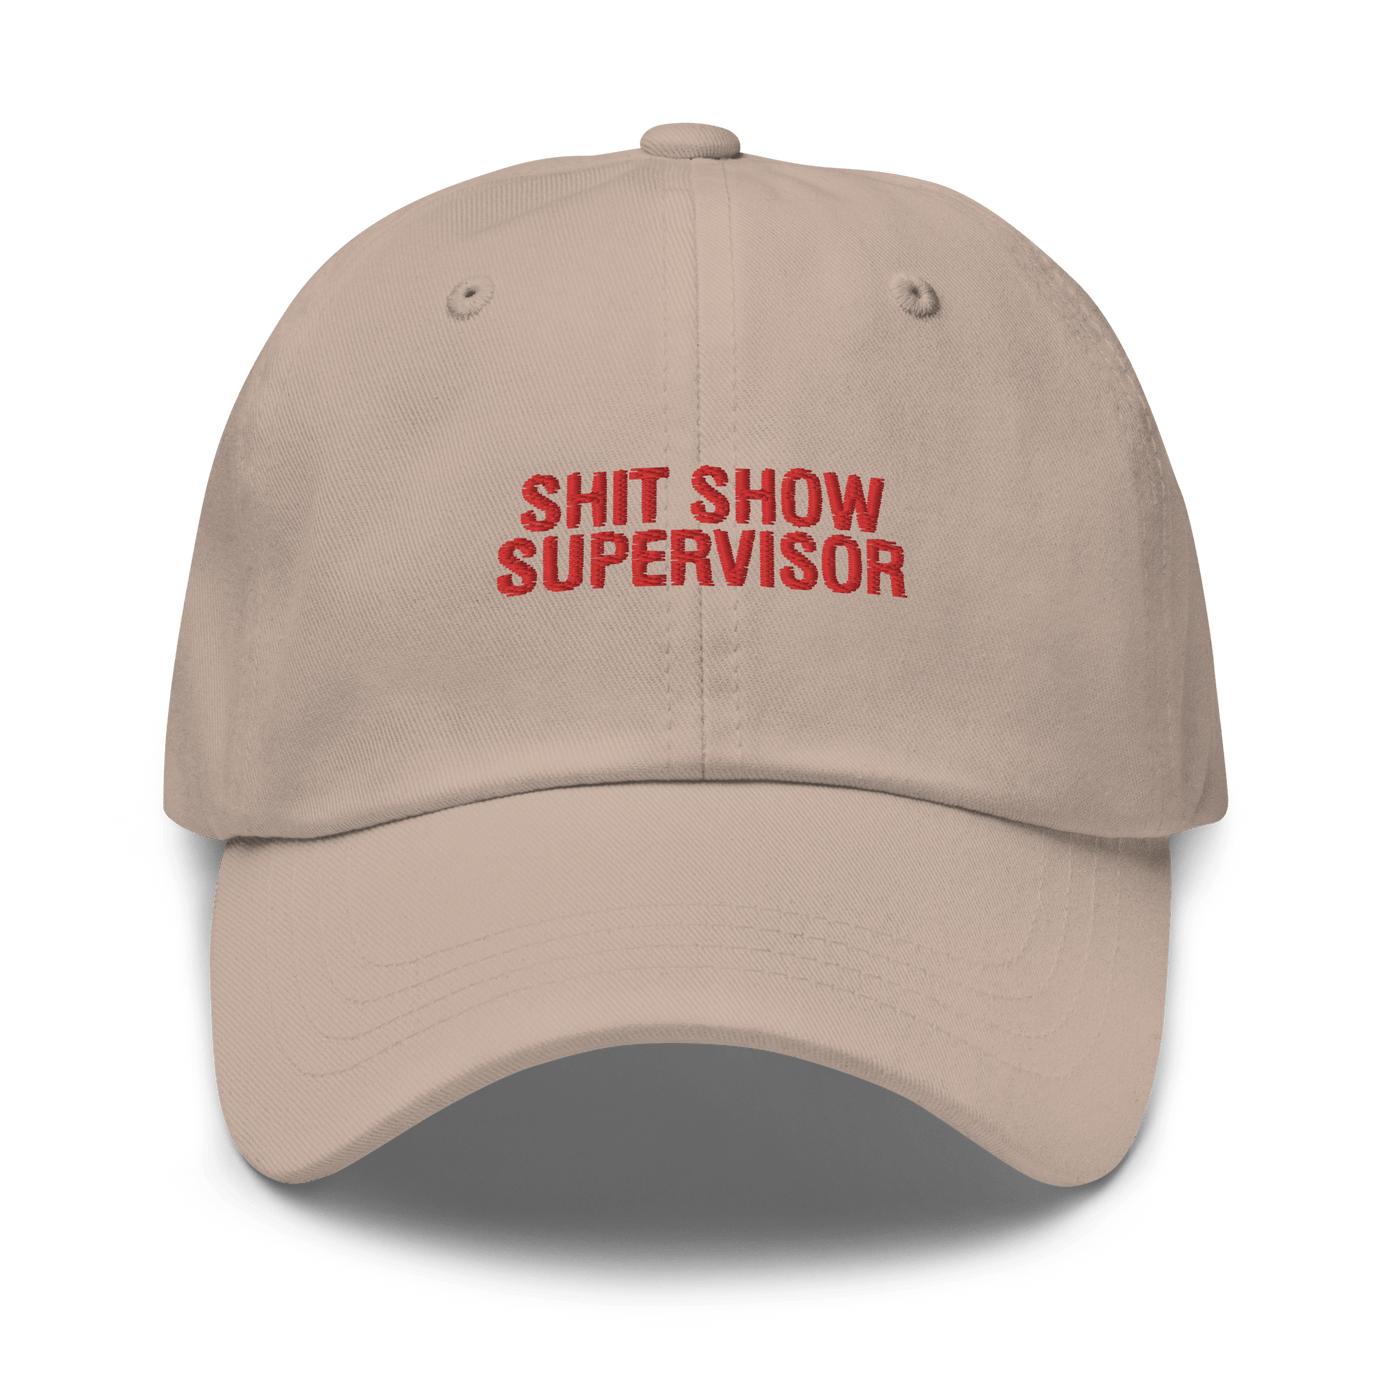 Shit Show Supervisor Dad hat - Stone - Just Another Cap Store